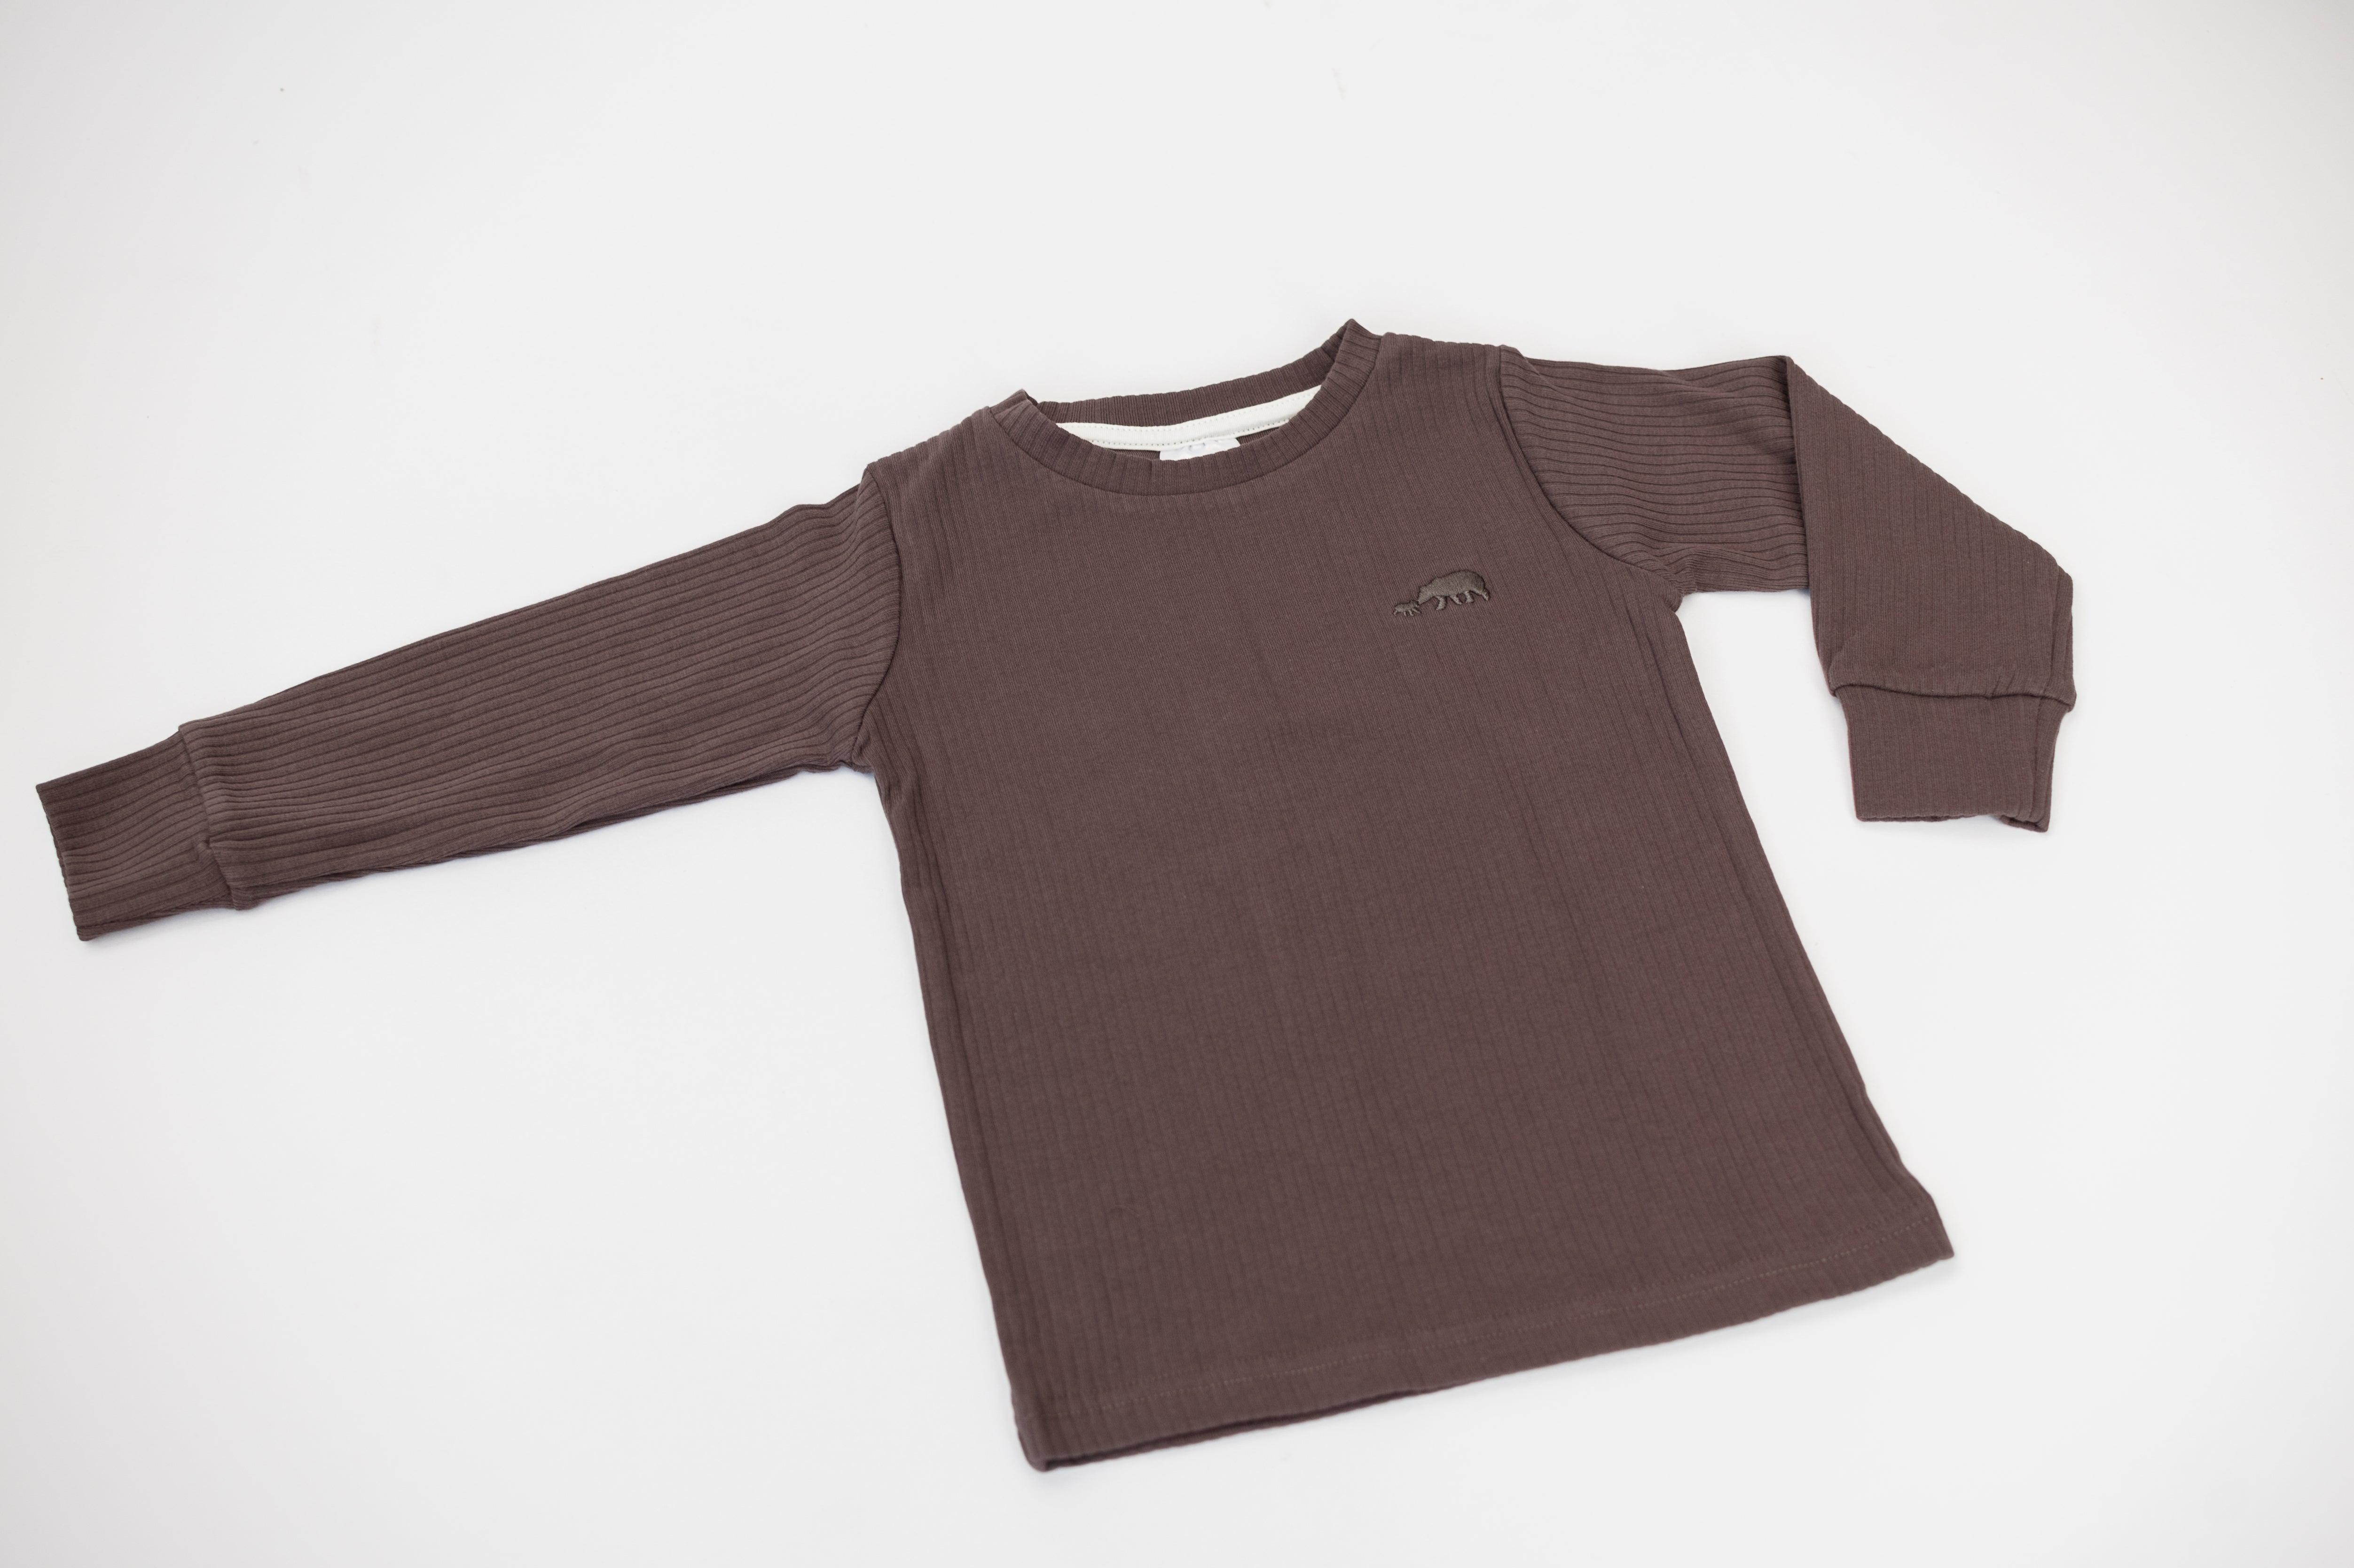 files/charcoal-greybrown-ribbed-long-sleeve-top-claybearofficial-1.jpg